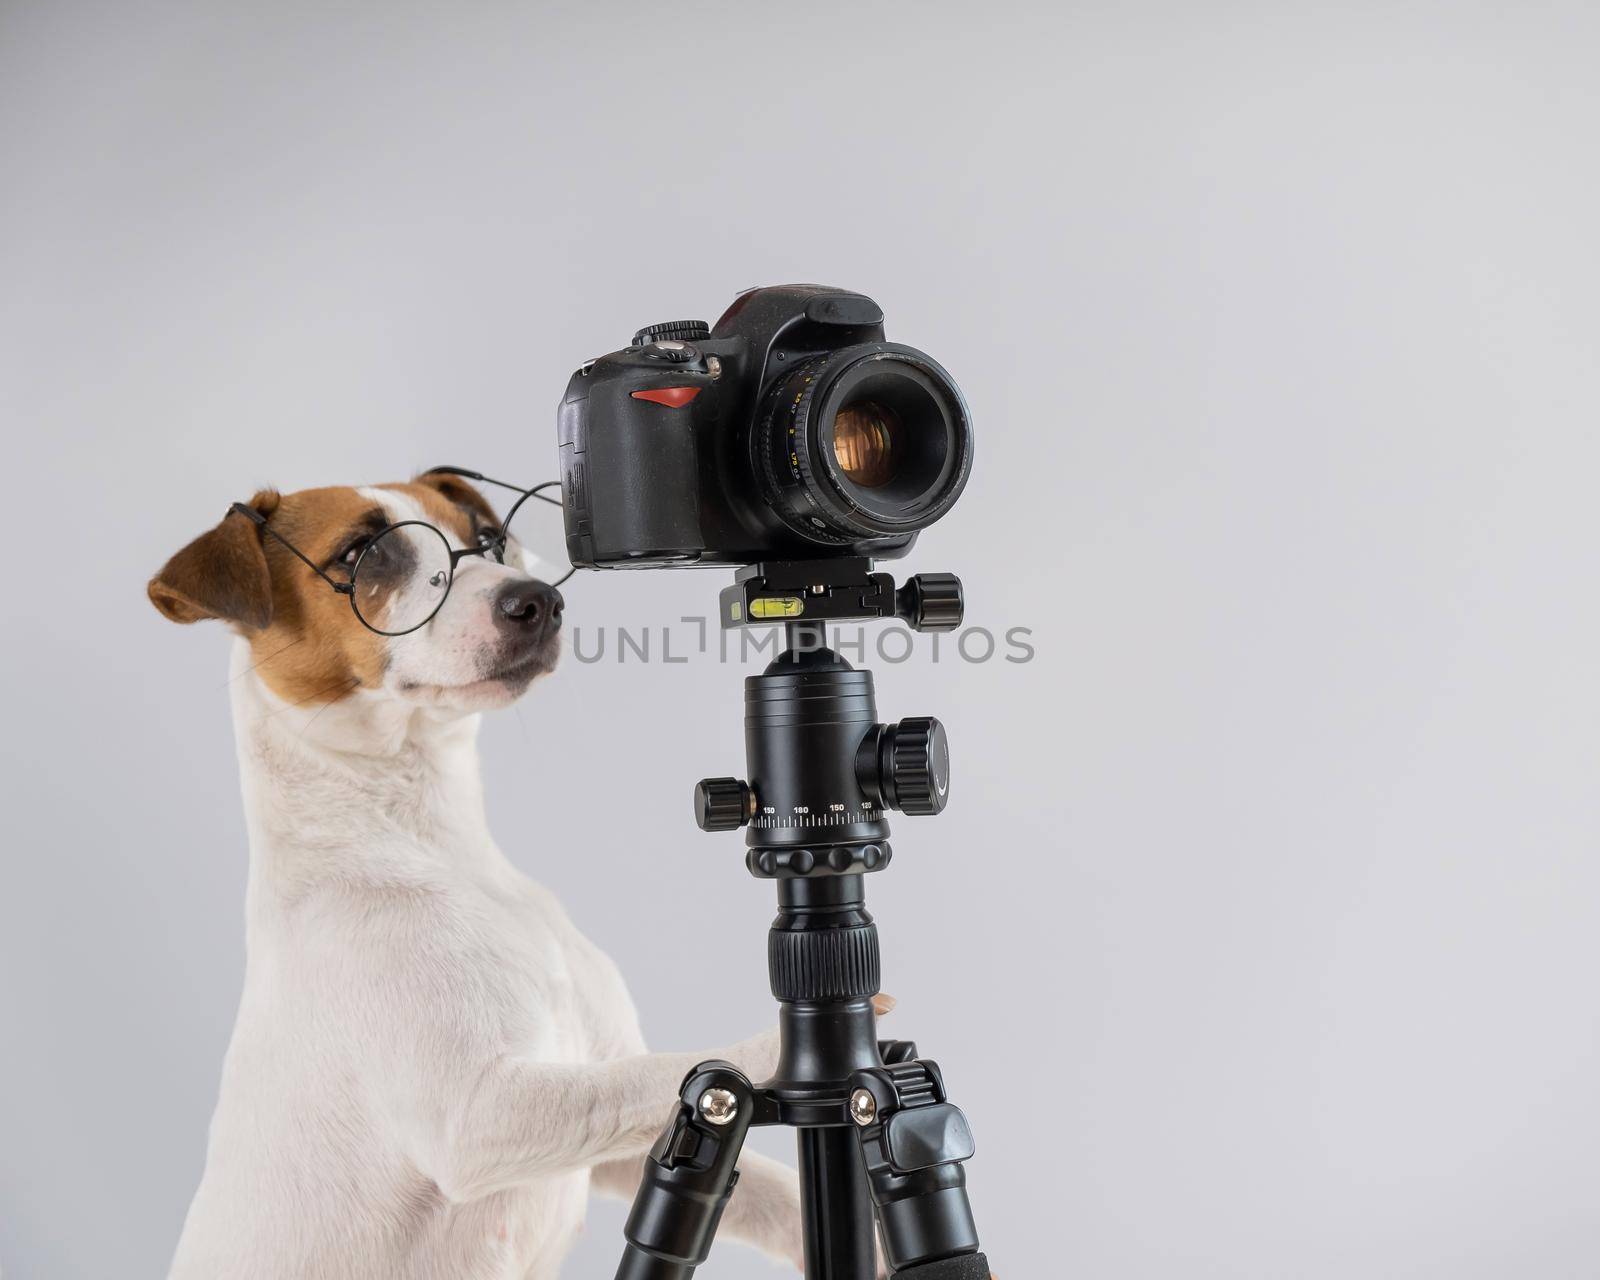 Dog jack russell terrier with glasses takes pictures on a camera on a tripod on a white background.